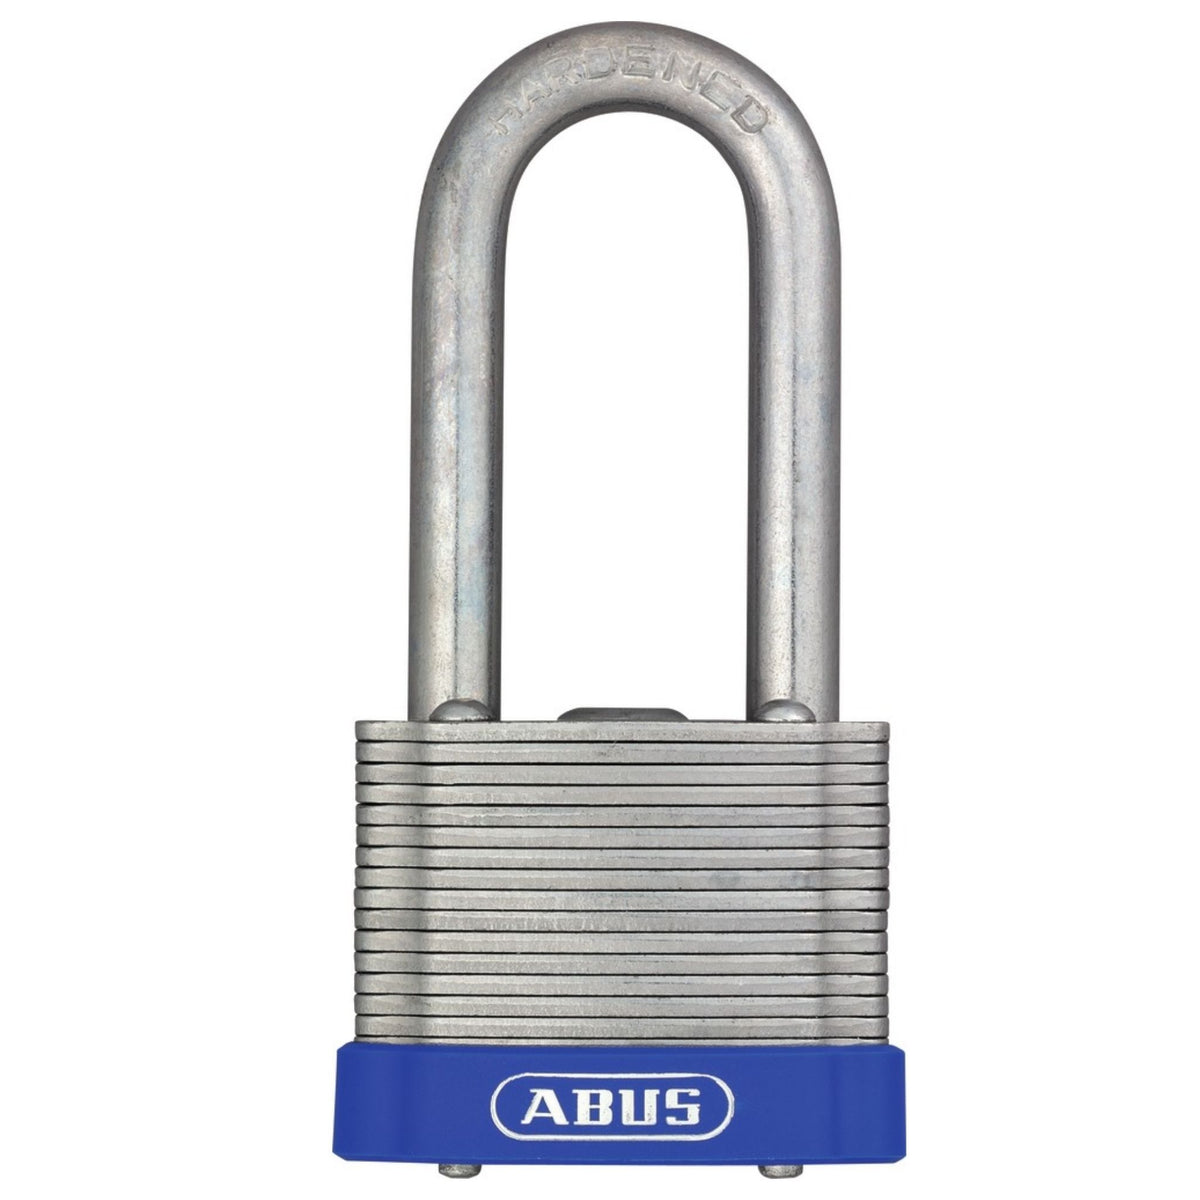 Abus 41/45HB50 KA EE 0174 Laminated Steel Padlocks with 2-Inch Shackle Keyed Alike to Match Existing Key Number EE1083 - The Lock Source